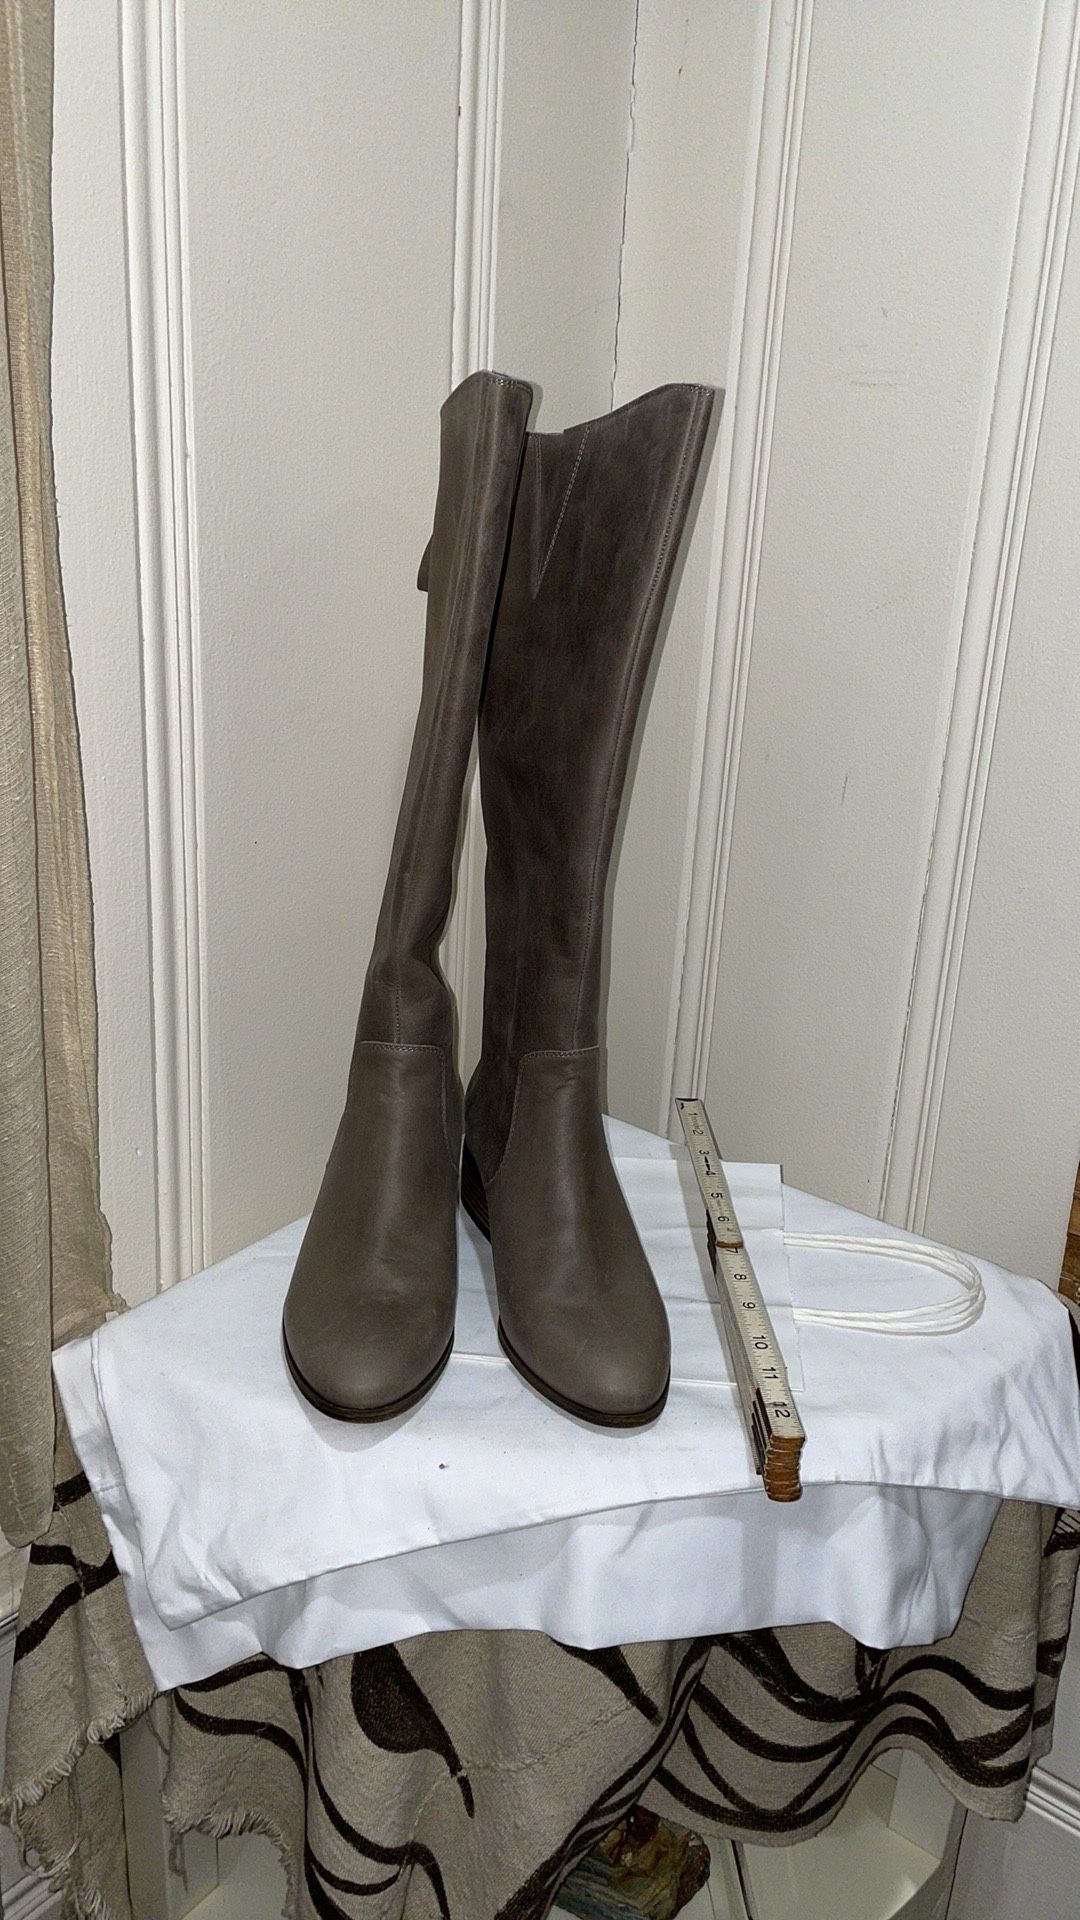 Lucky Brand riding boots in a grayish brown color. New with tags.  Size 8M